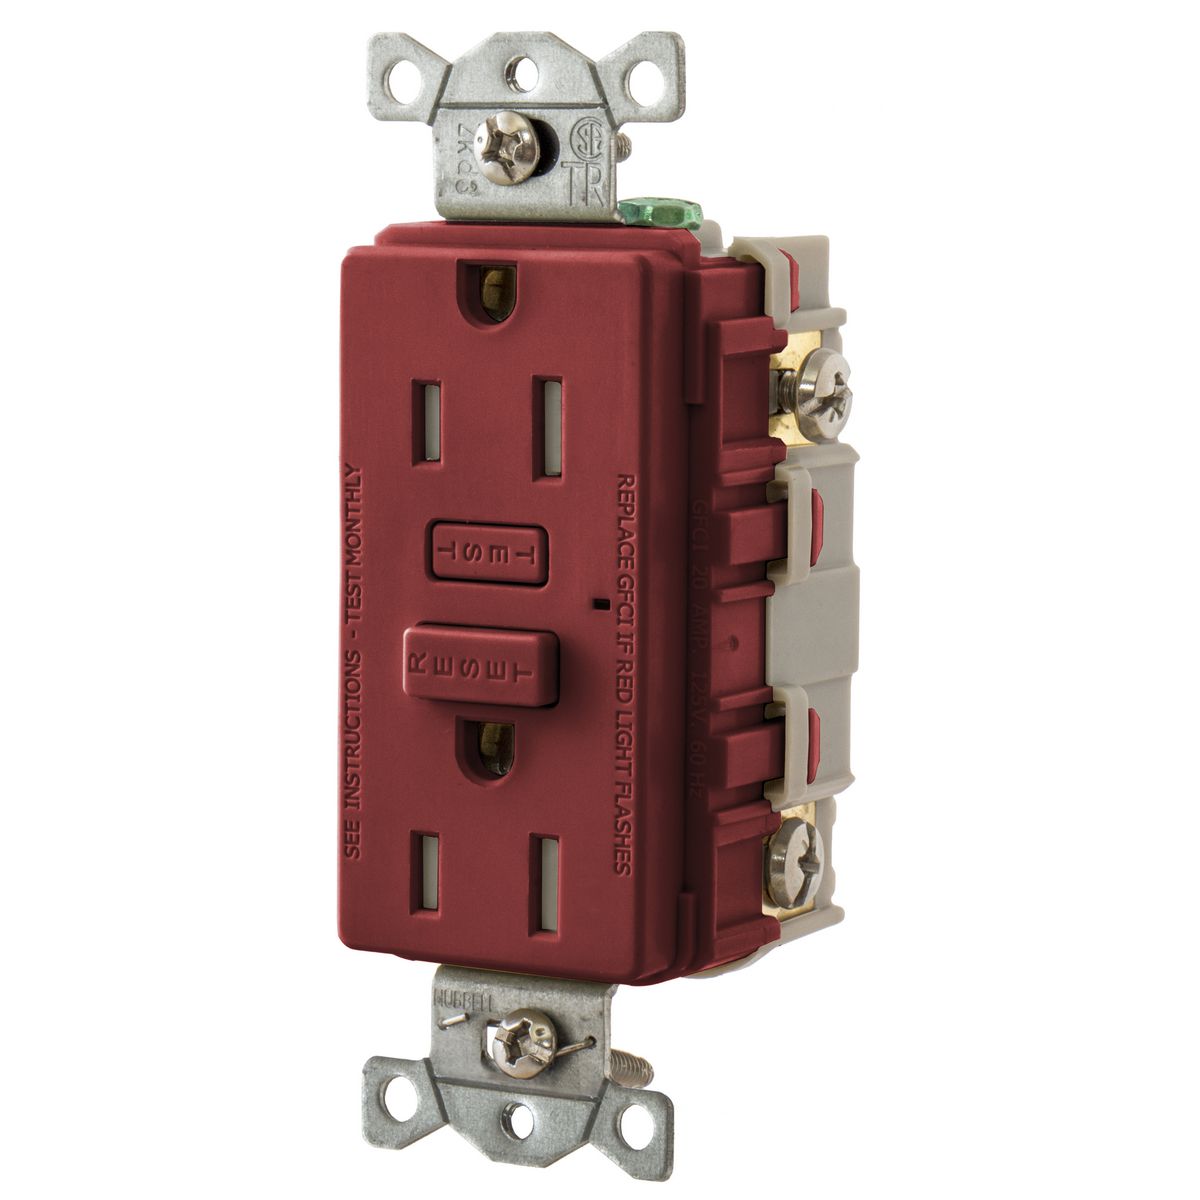 Hubbell Wiring Device Kellems, Power Protective Products, GFCIReceptacle, Hubbell Pro, 15A 125V AC, 2-Pole 3-Wire Grounding, 5-15R,Red